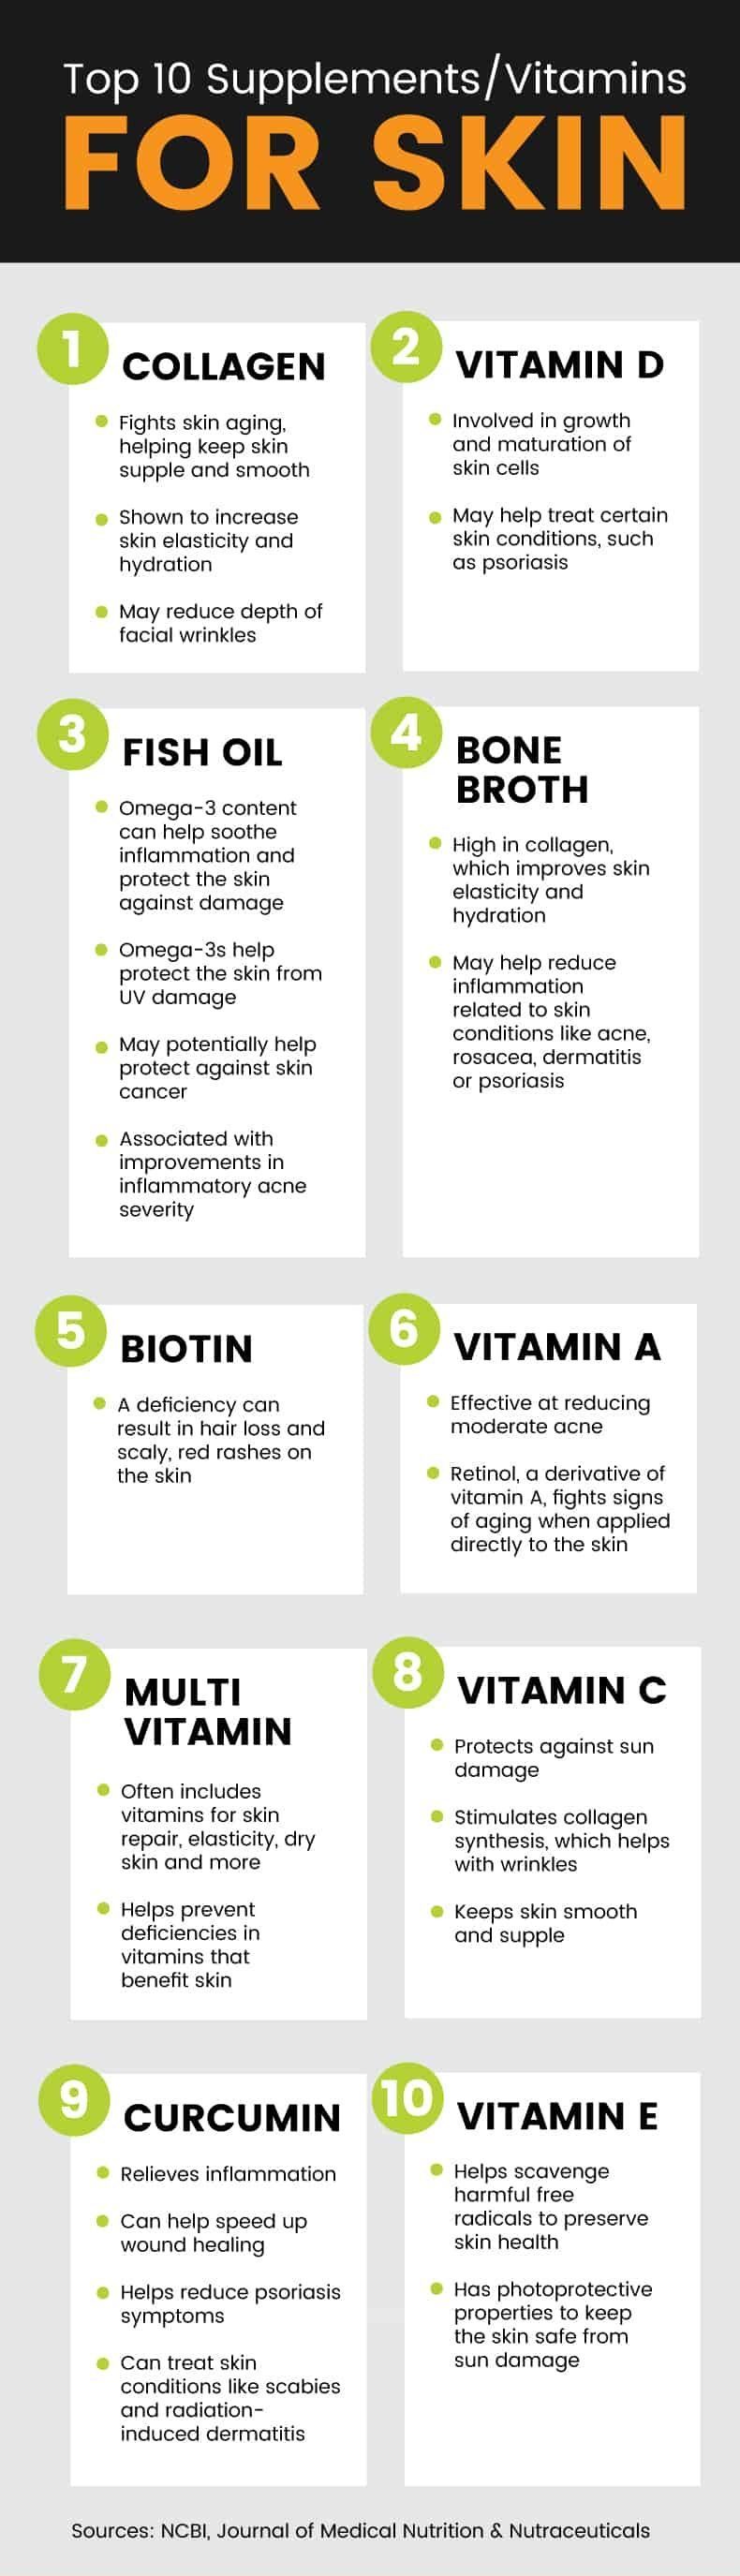 Vitamins for skin - Dr. Axe